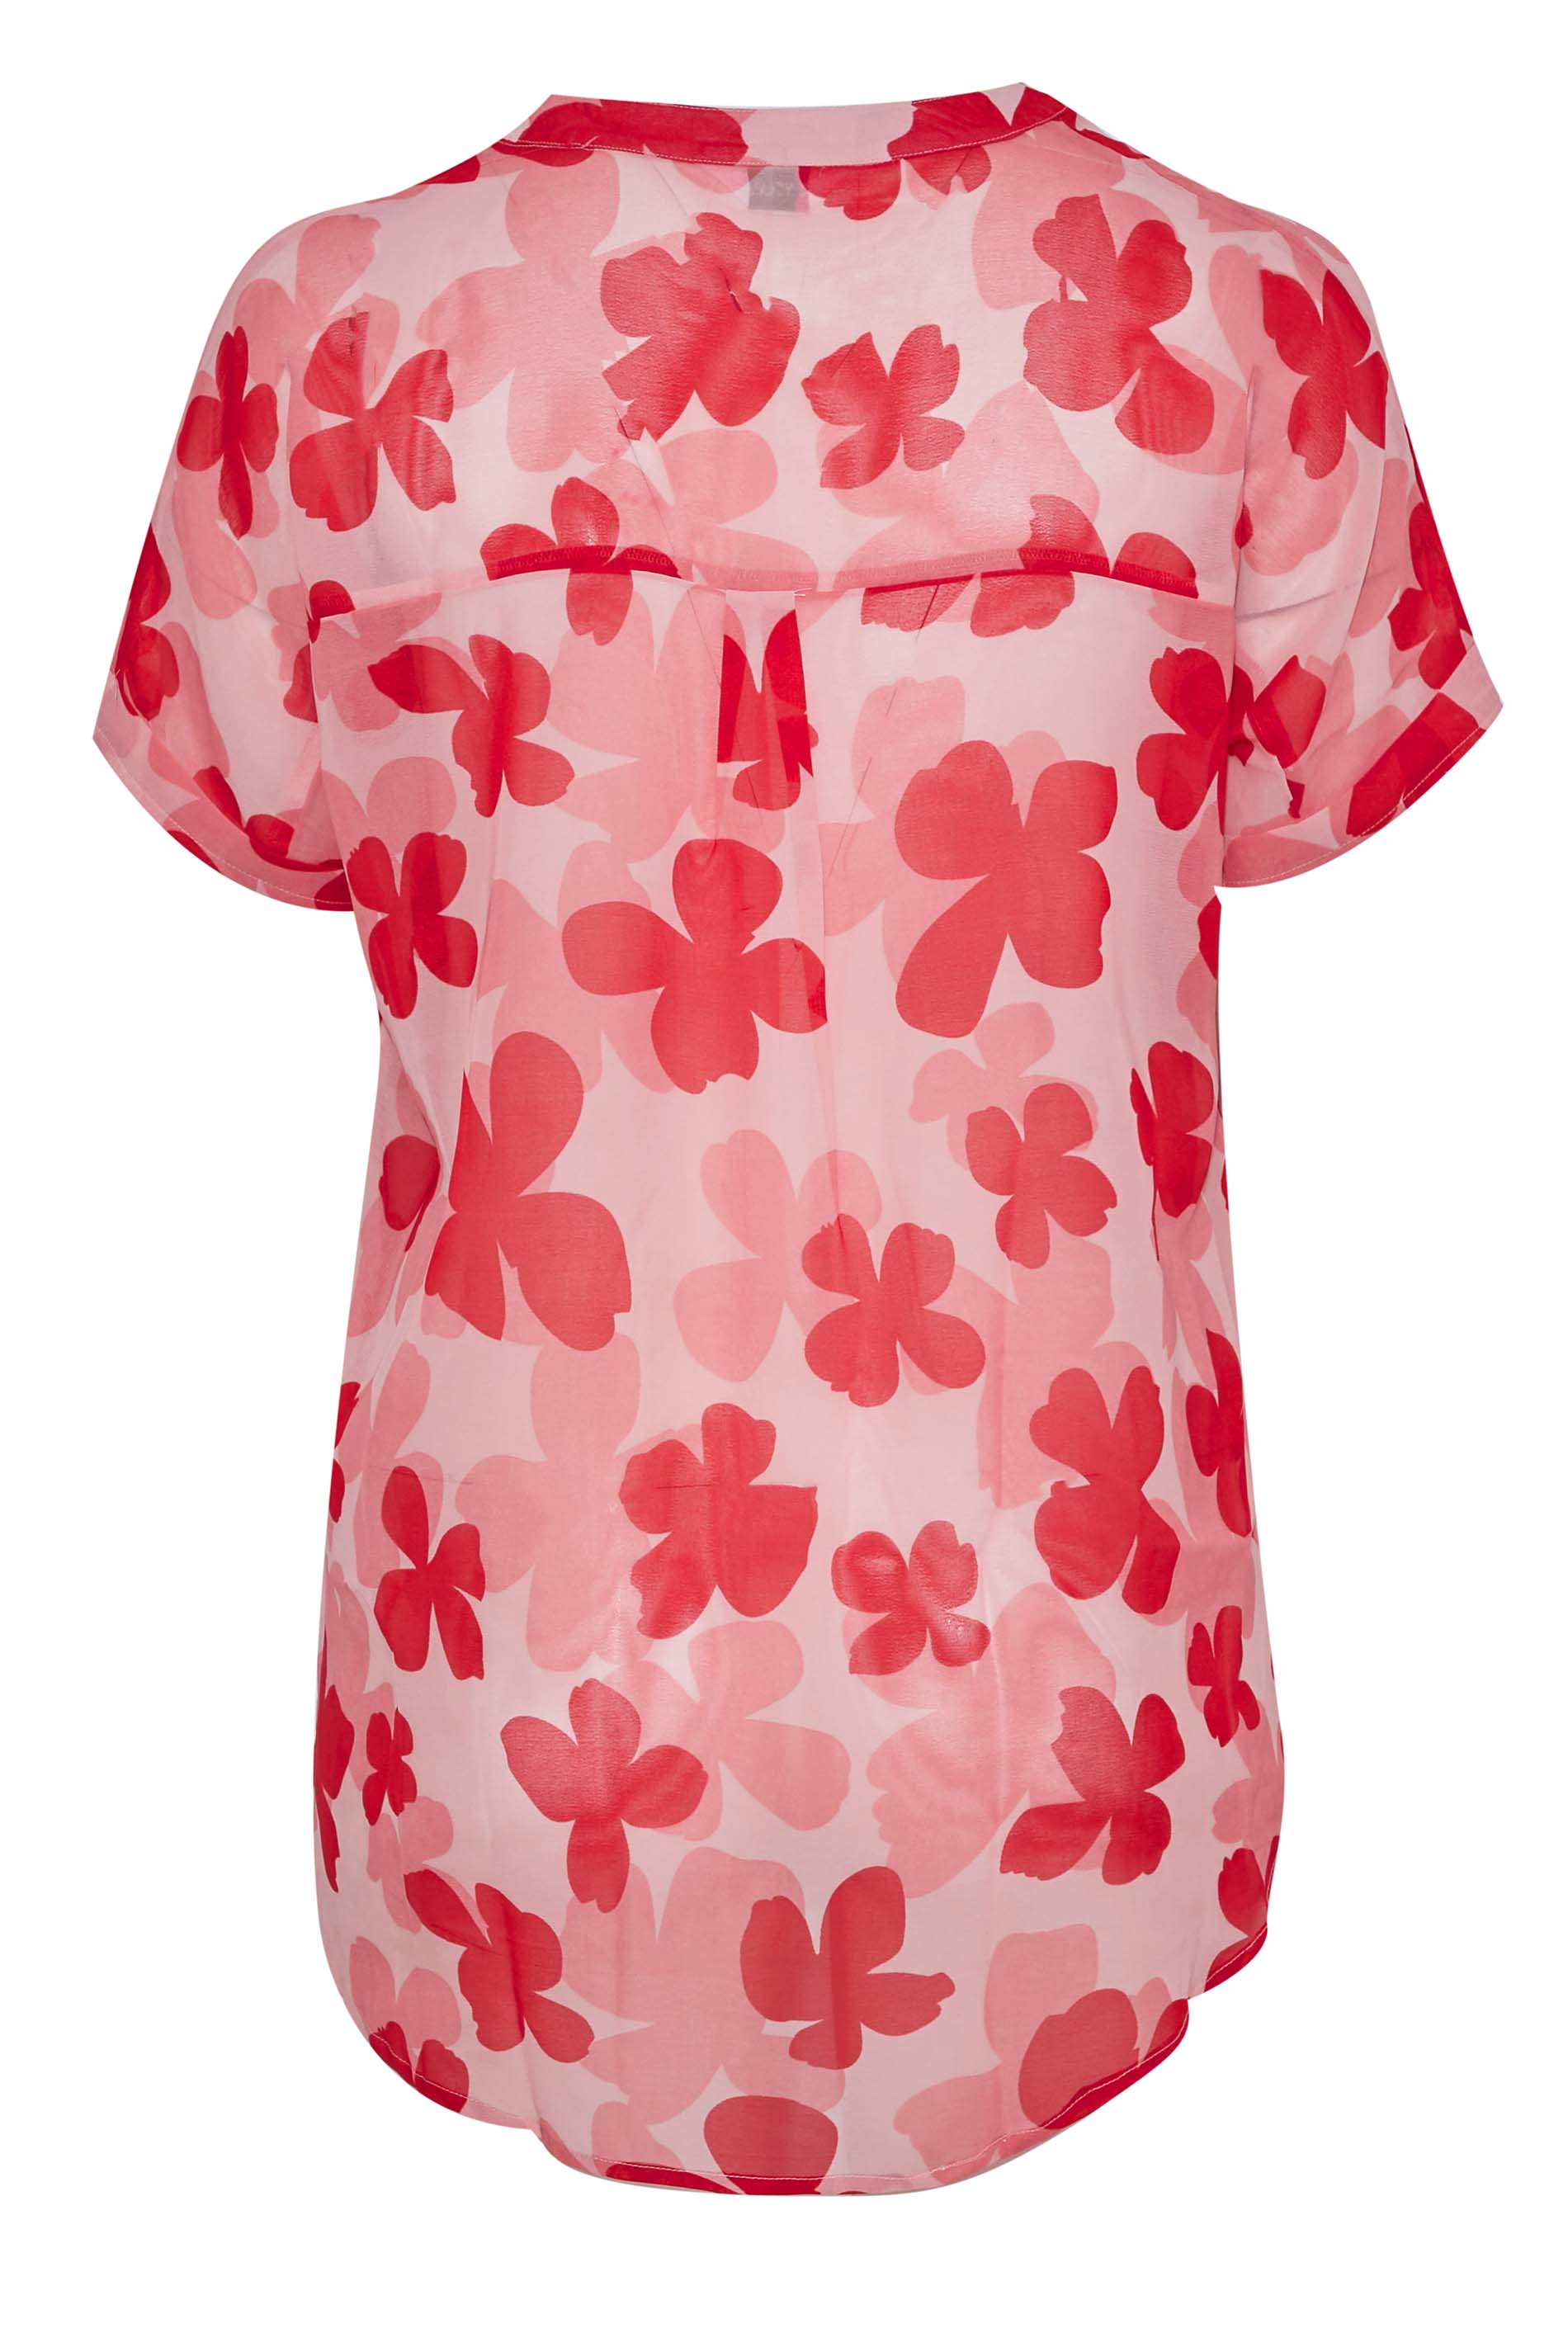 Grande taille  Tops Grande taille  Blouses & Chemisiers | Curve Pink Floral Print Grown On Sleeve Chiffon Shirt - PA77723